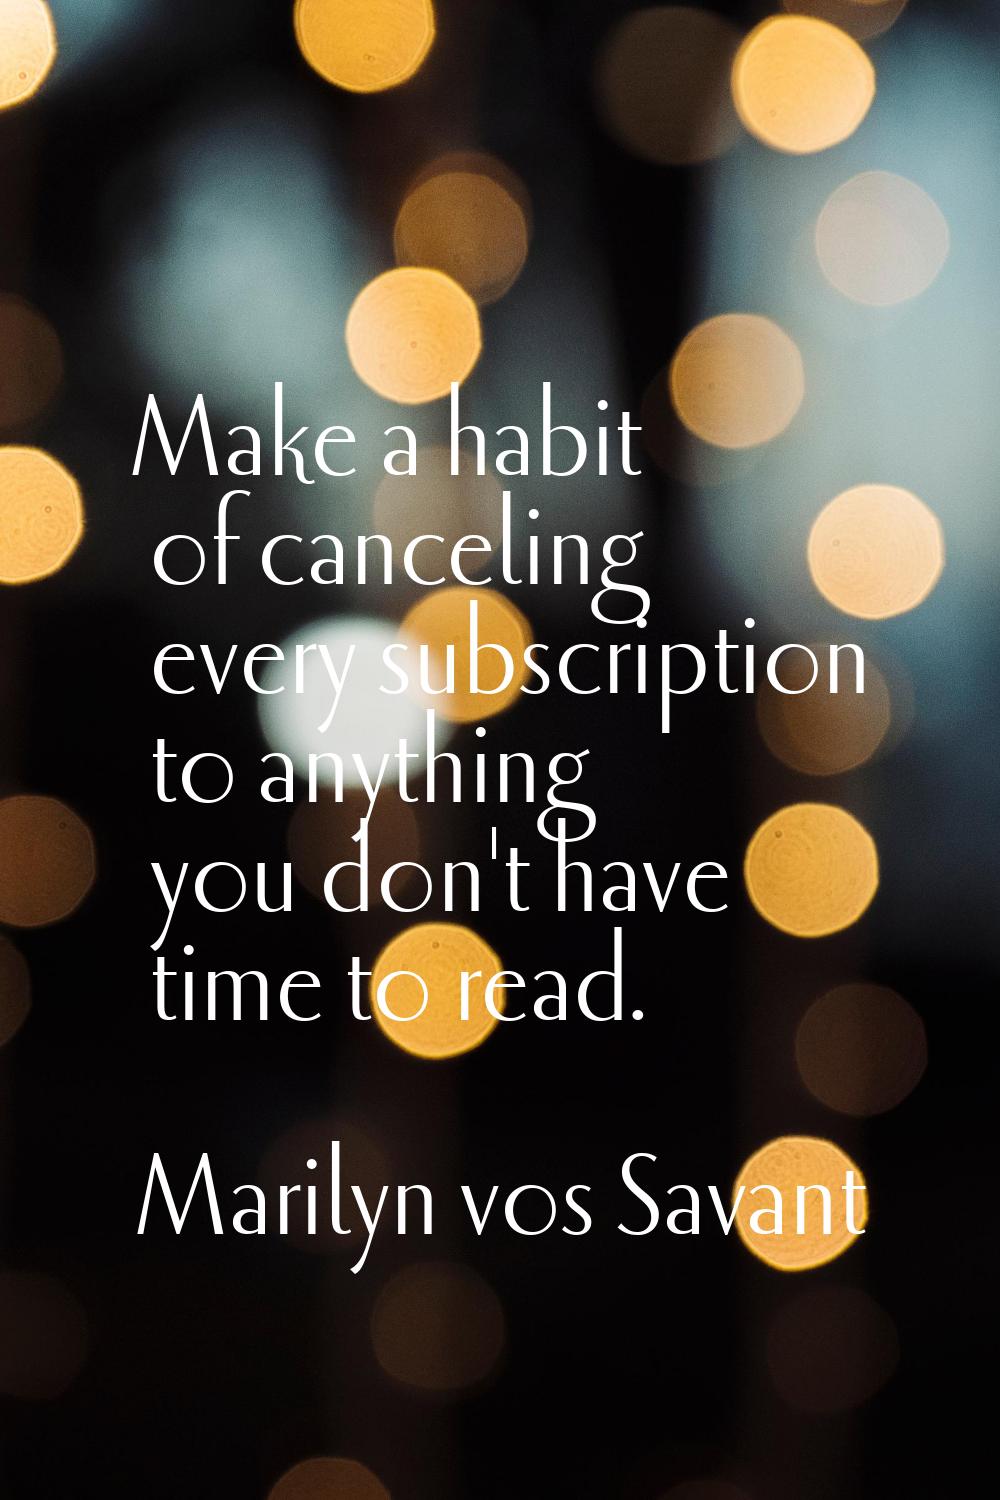 Make a habit of canceling every subscription to anything you don't have time to read.